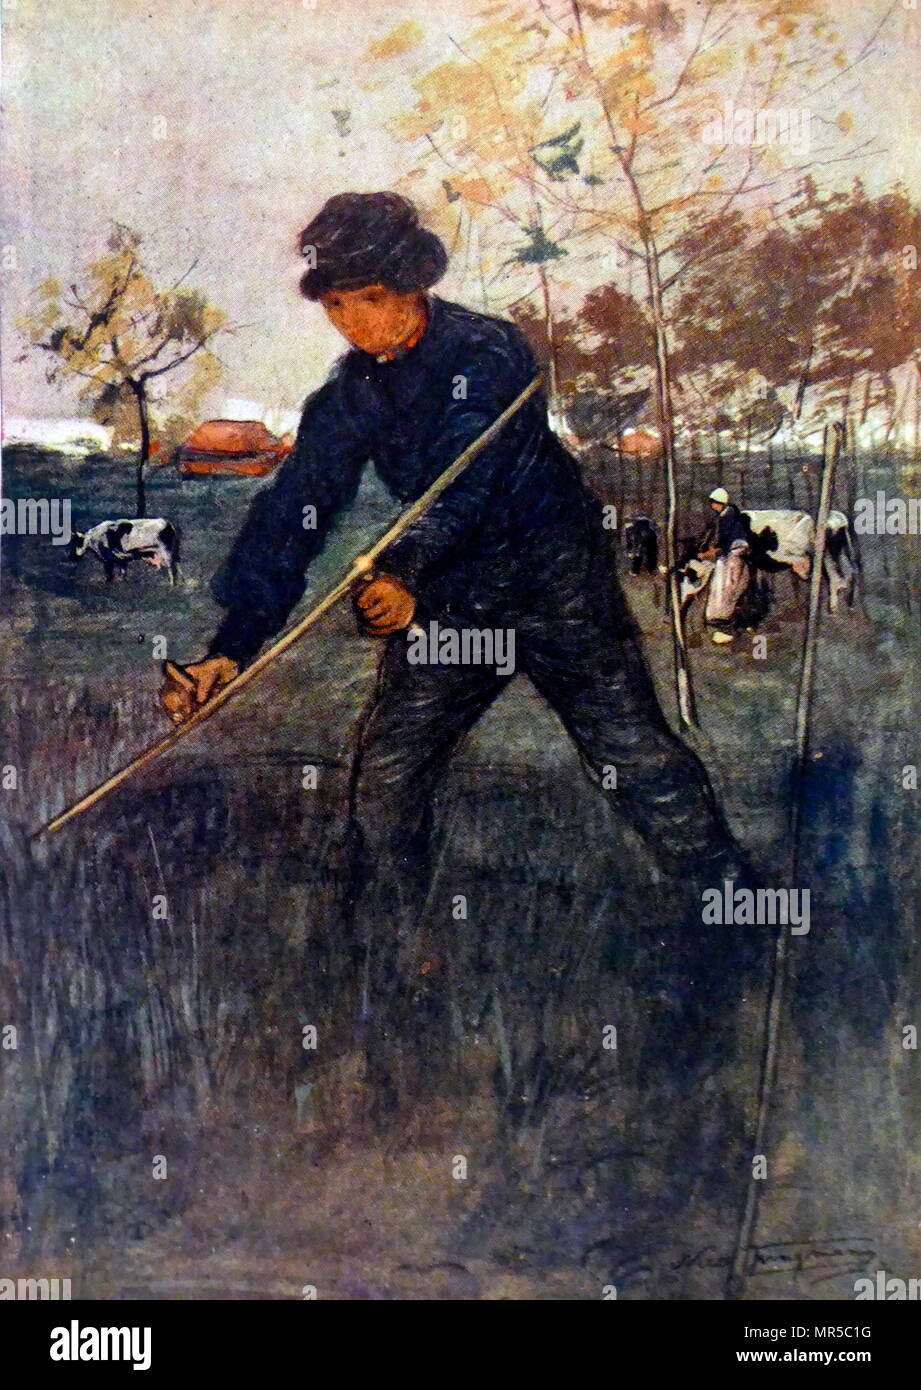 Painting titled 'The Mower' by Nico Jungmann. Nico Jungmann (1872-1935) an Anglo-Dutch painter of landscapes and figural subjects. Dated 20th Century Stock Photo